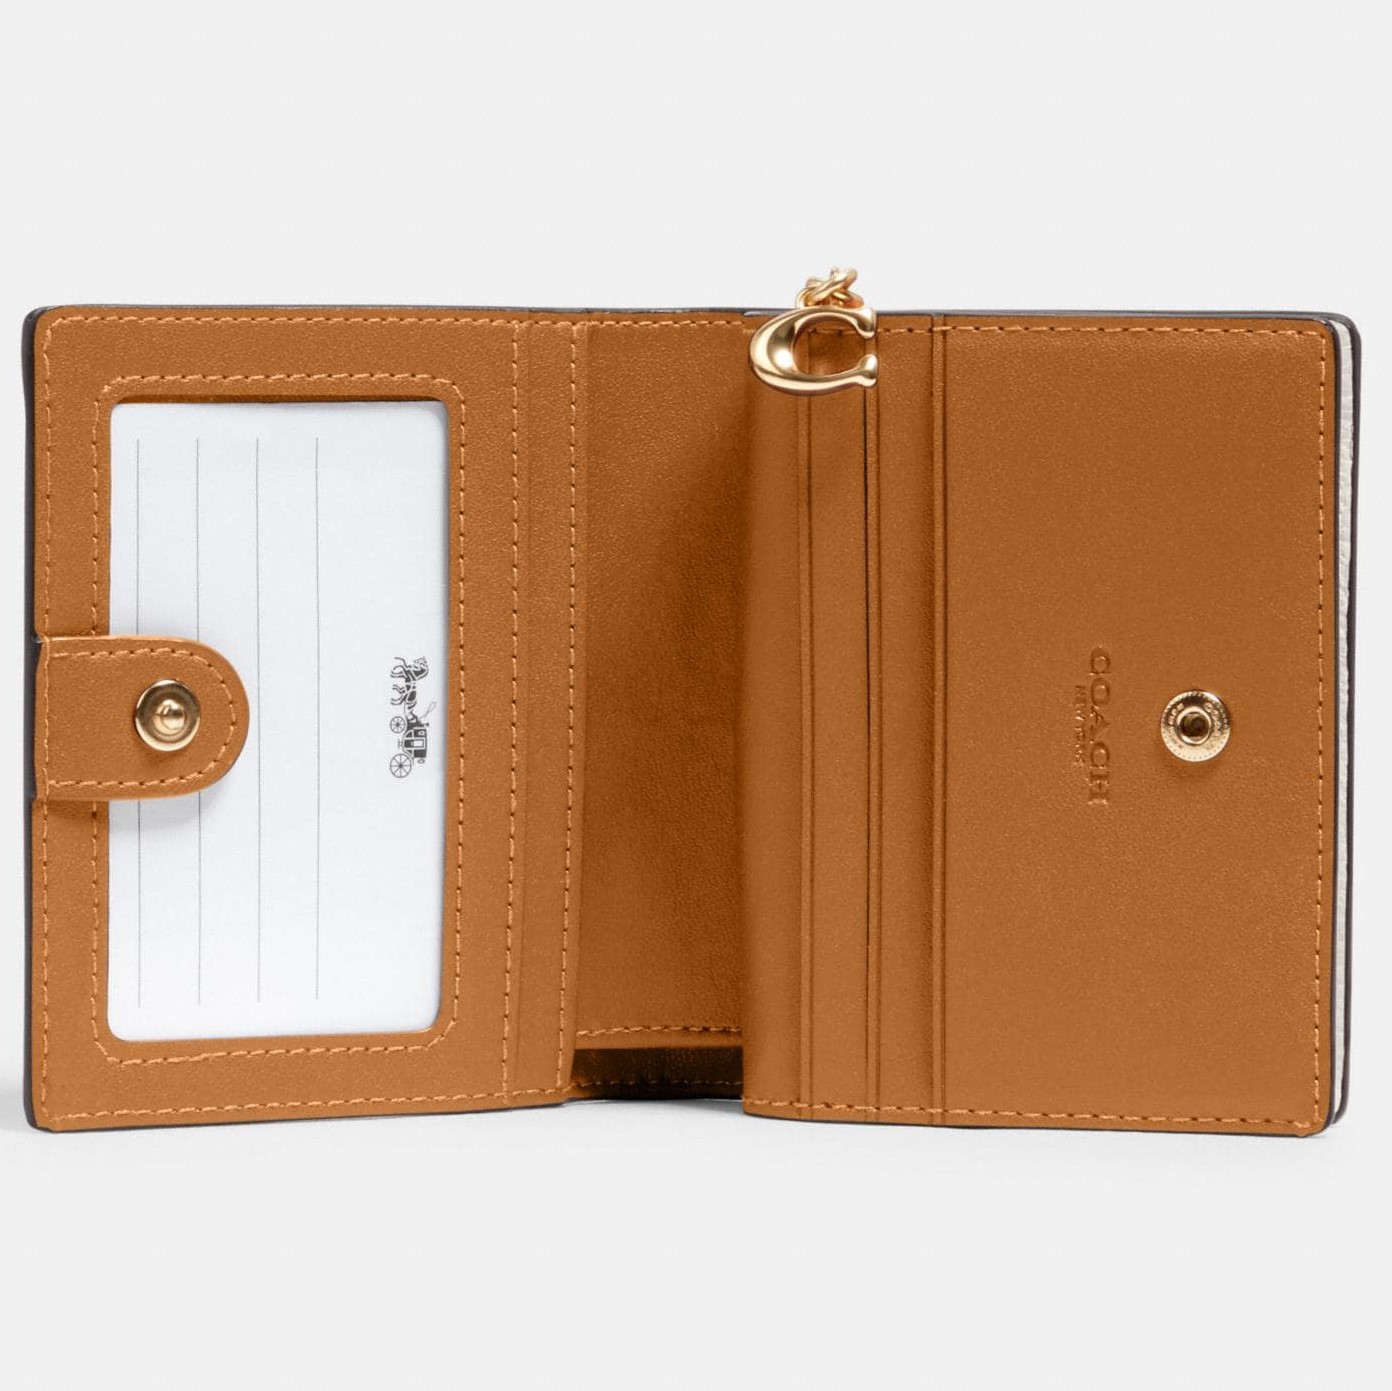 VÍ NGẮN COACH SMALL WALLET PEBBLE LEATHER SNAP WALLET 24